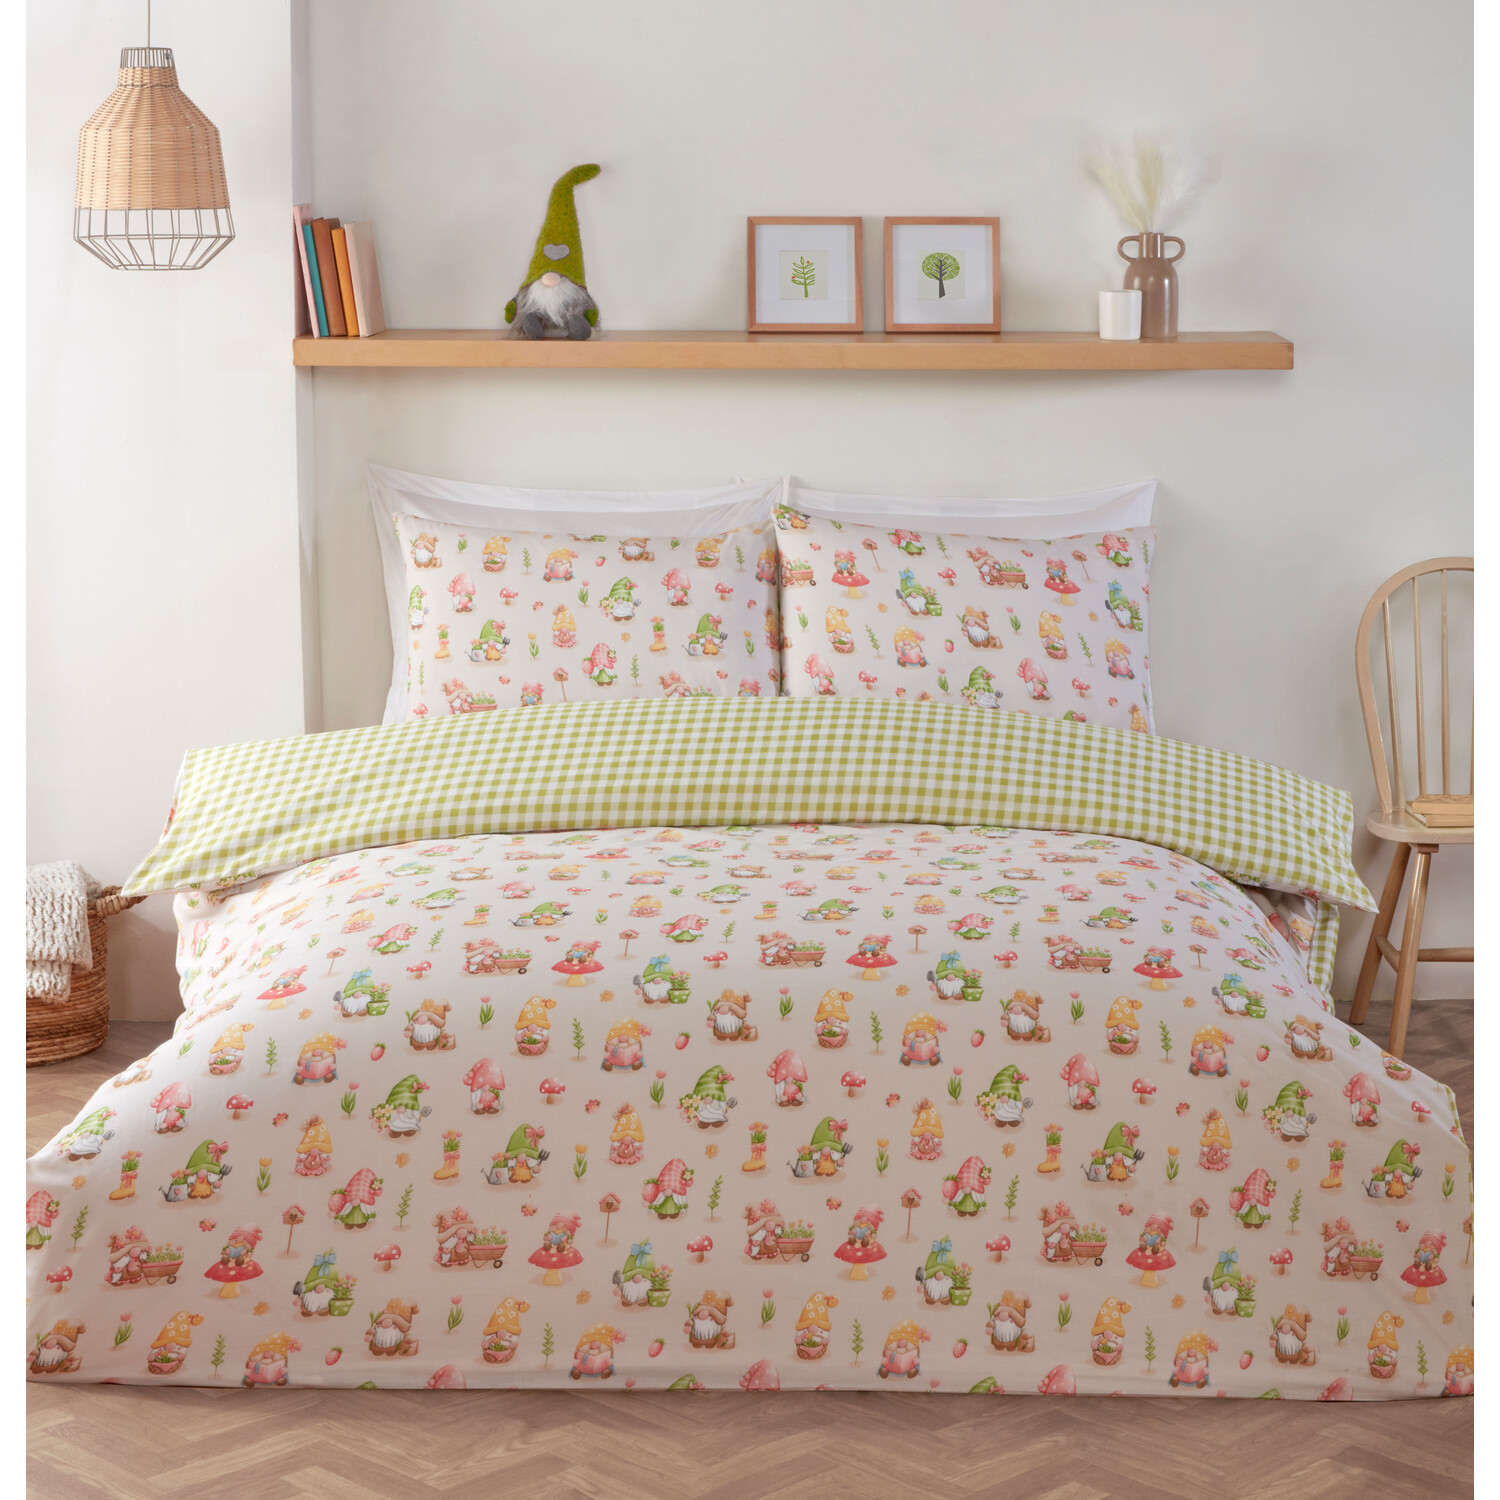 Spring Gnomes Duvet Cover and Pillowcase Set - Natural / Double Image 1